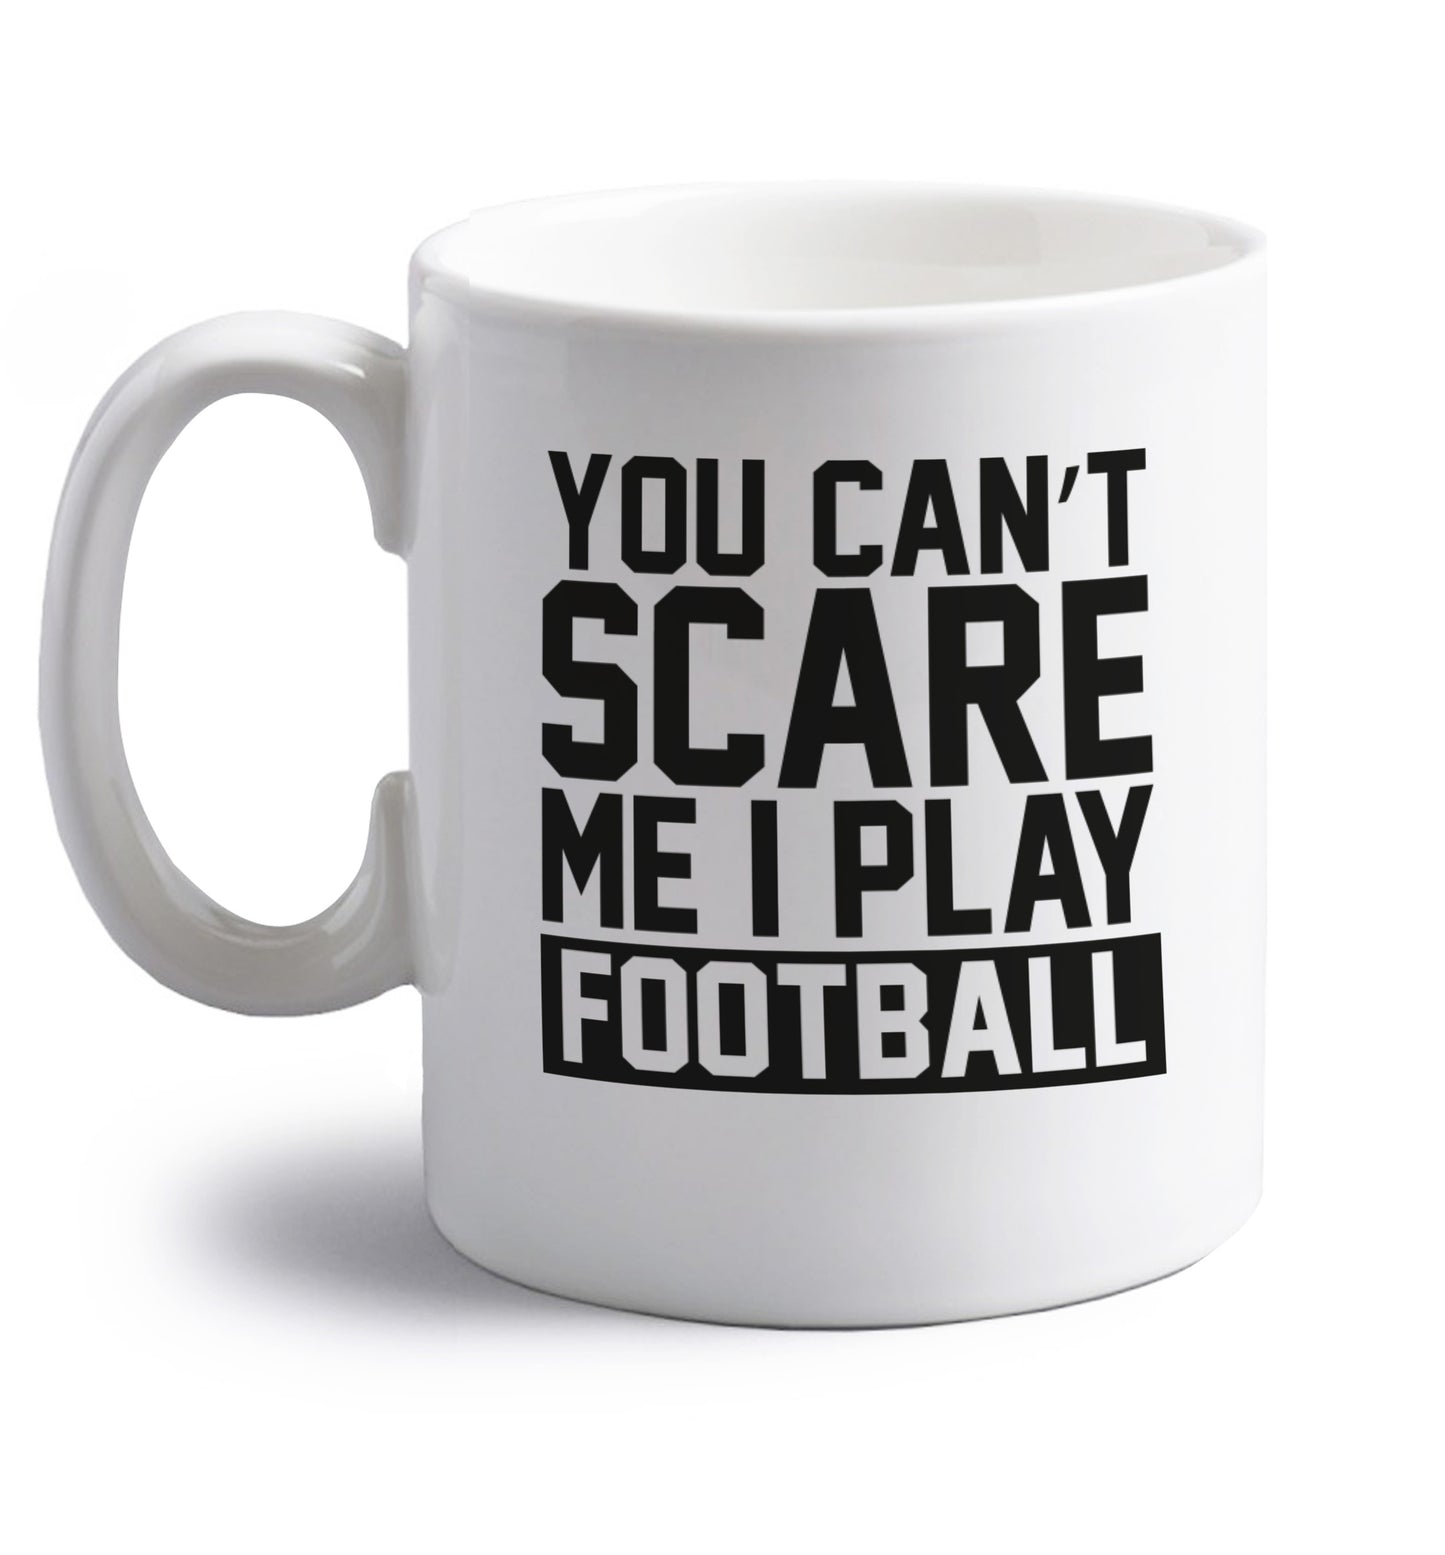 You can't scare me I play football right handed white ceramic mug 